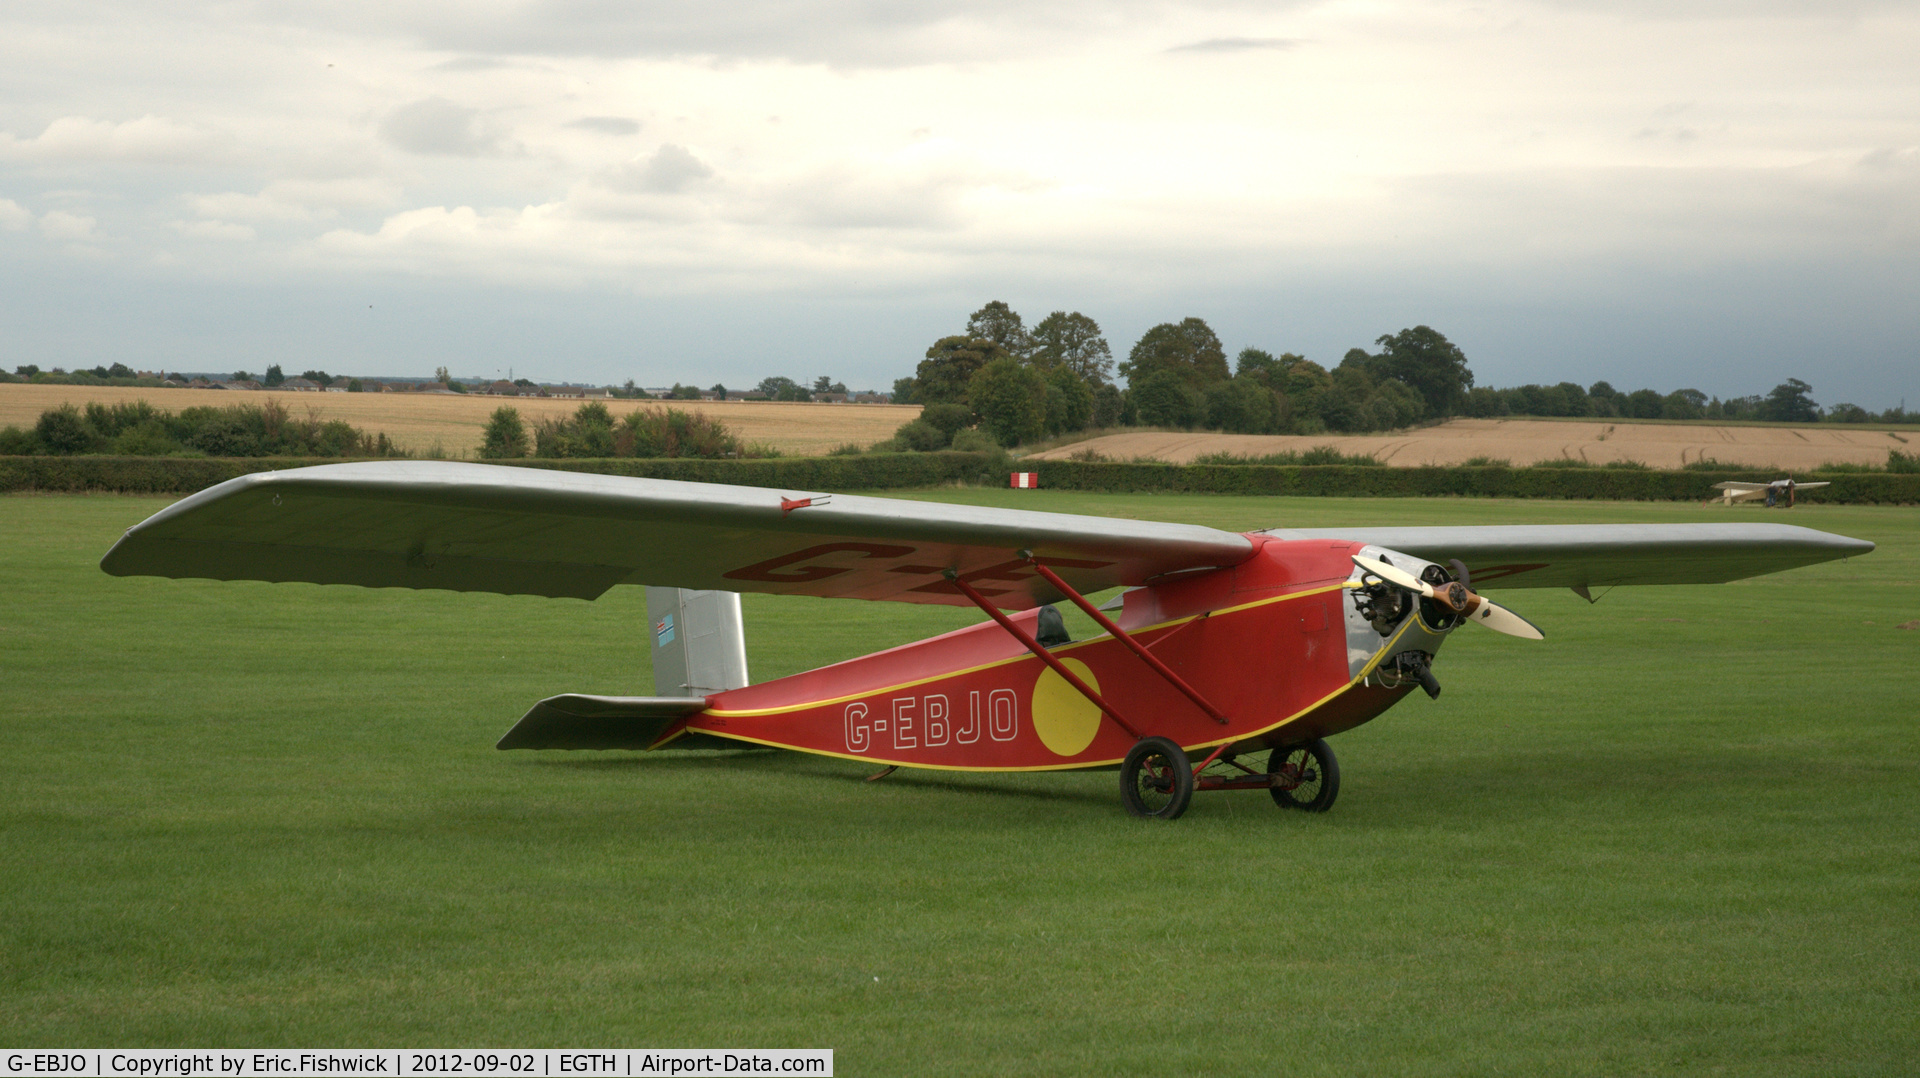 G-EBJO, 1924 Air Navigation And Engineering ANEC II C/N 1, 3. G-EBJO at Shuttleworth Pagent Air Display, Sept. 2012.